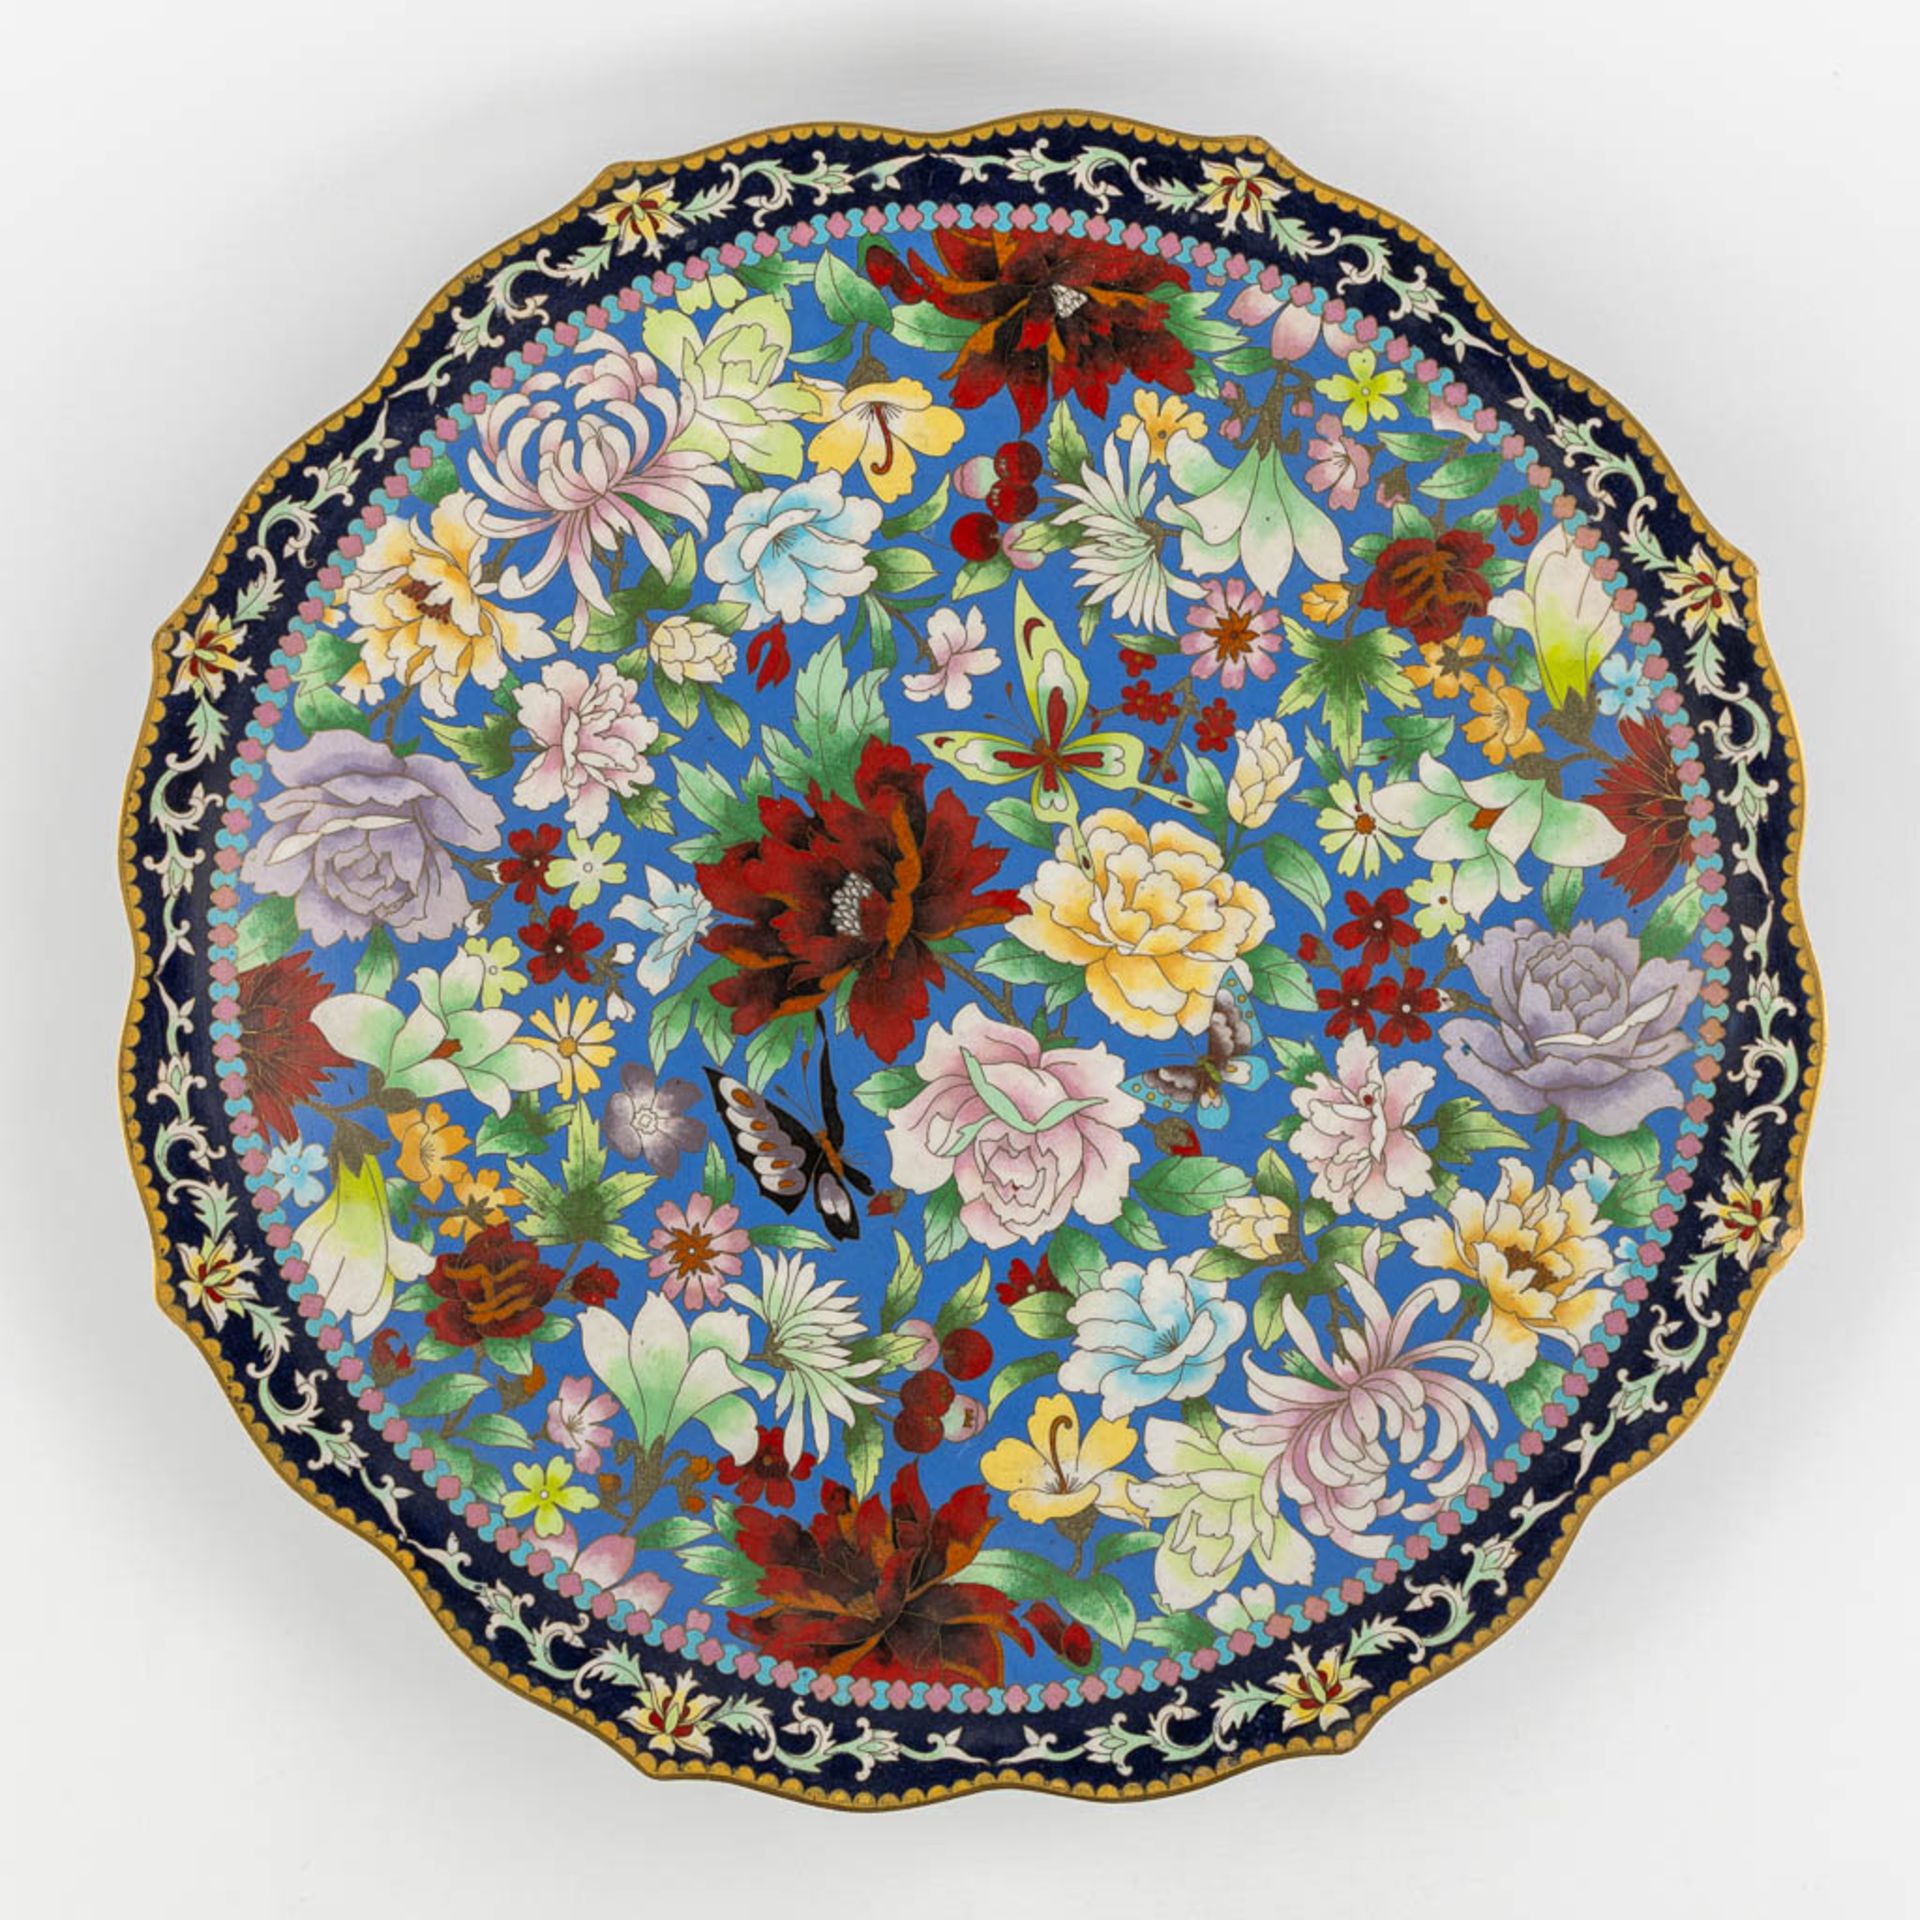 A large Chinese Cloisonné plate in an openworked sculptured wood stand. (W:51 x H:67 cm) - Image 11 of 12